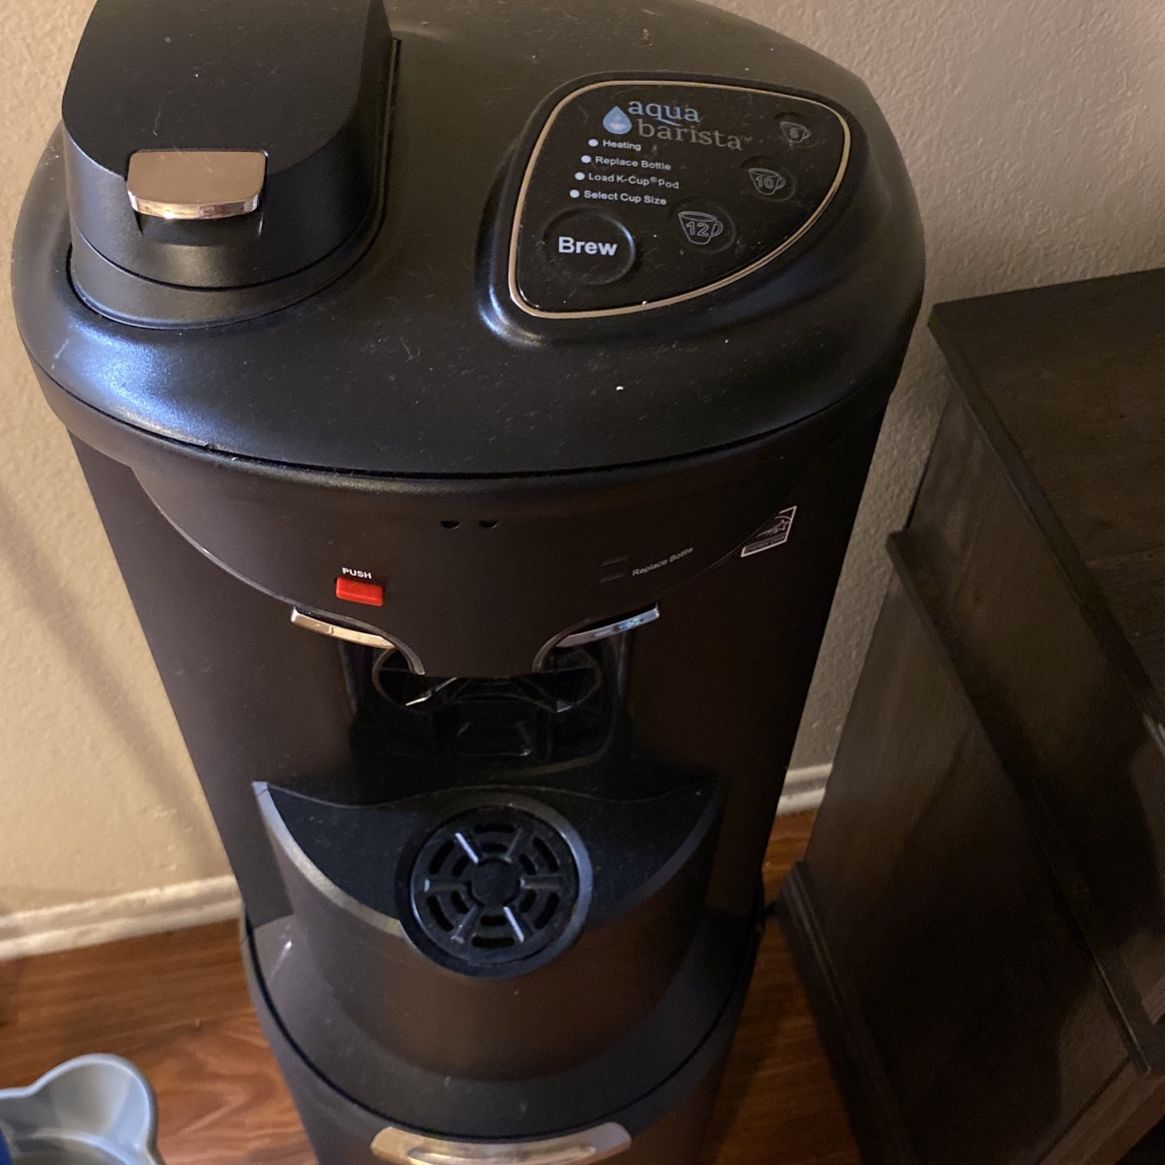 Mainstays Five Cup Coffee Maker for Sale in Los Angeles, CA - OfferUp